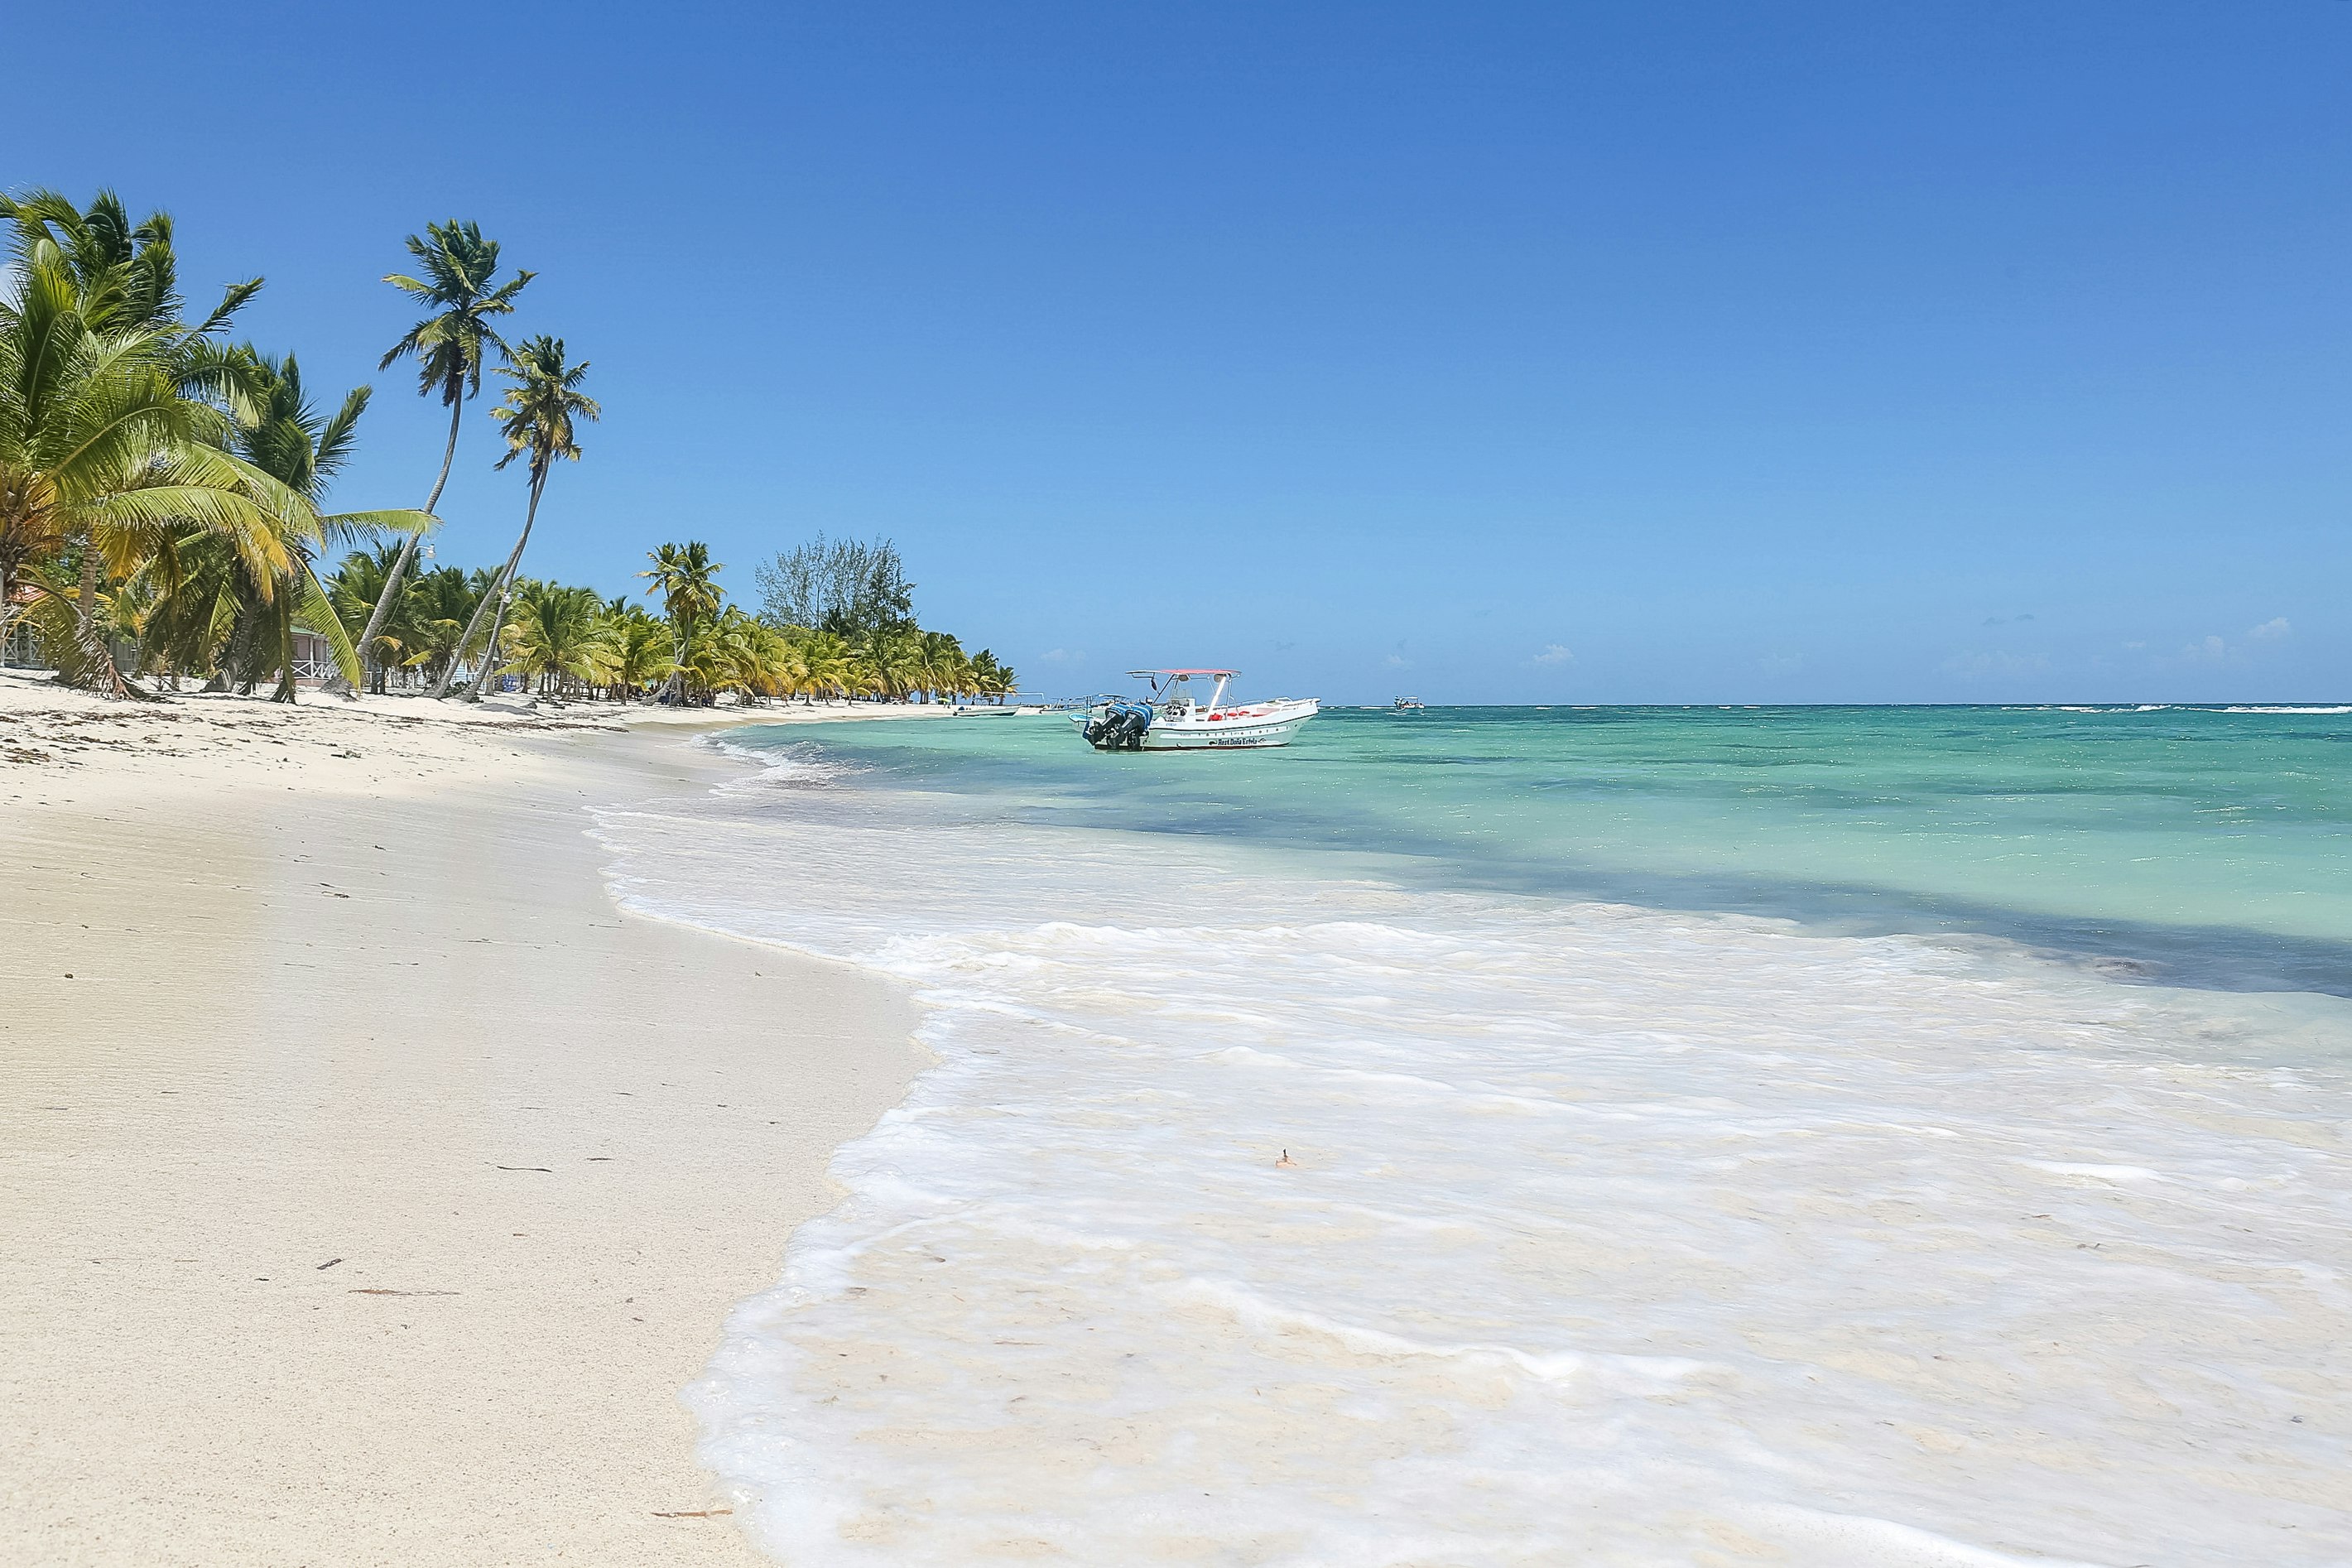 10 Fun Facts about the Dominican Republic